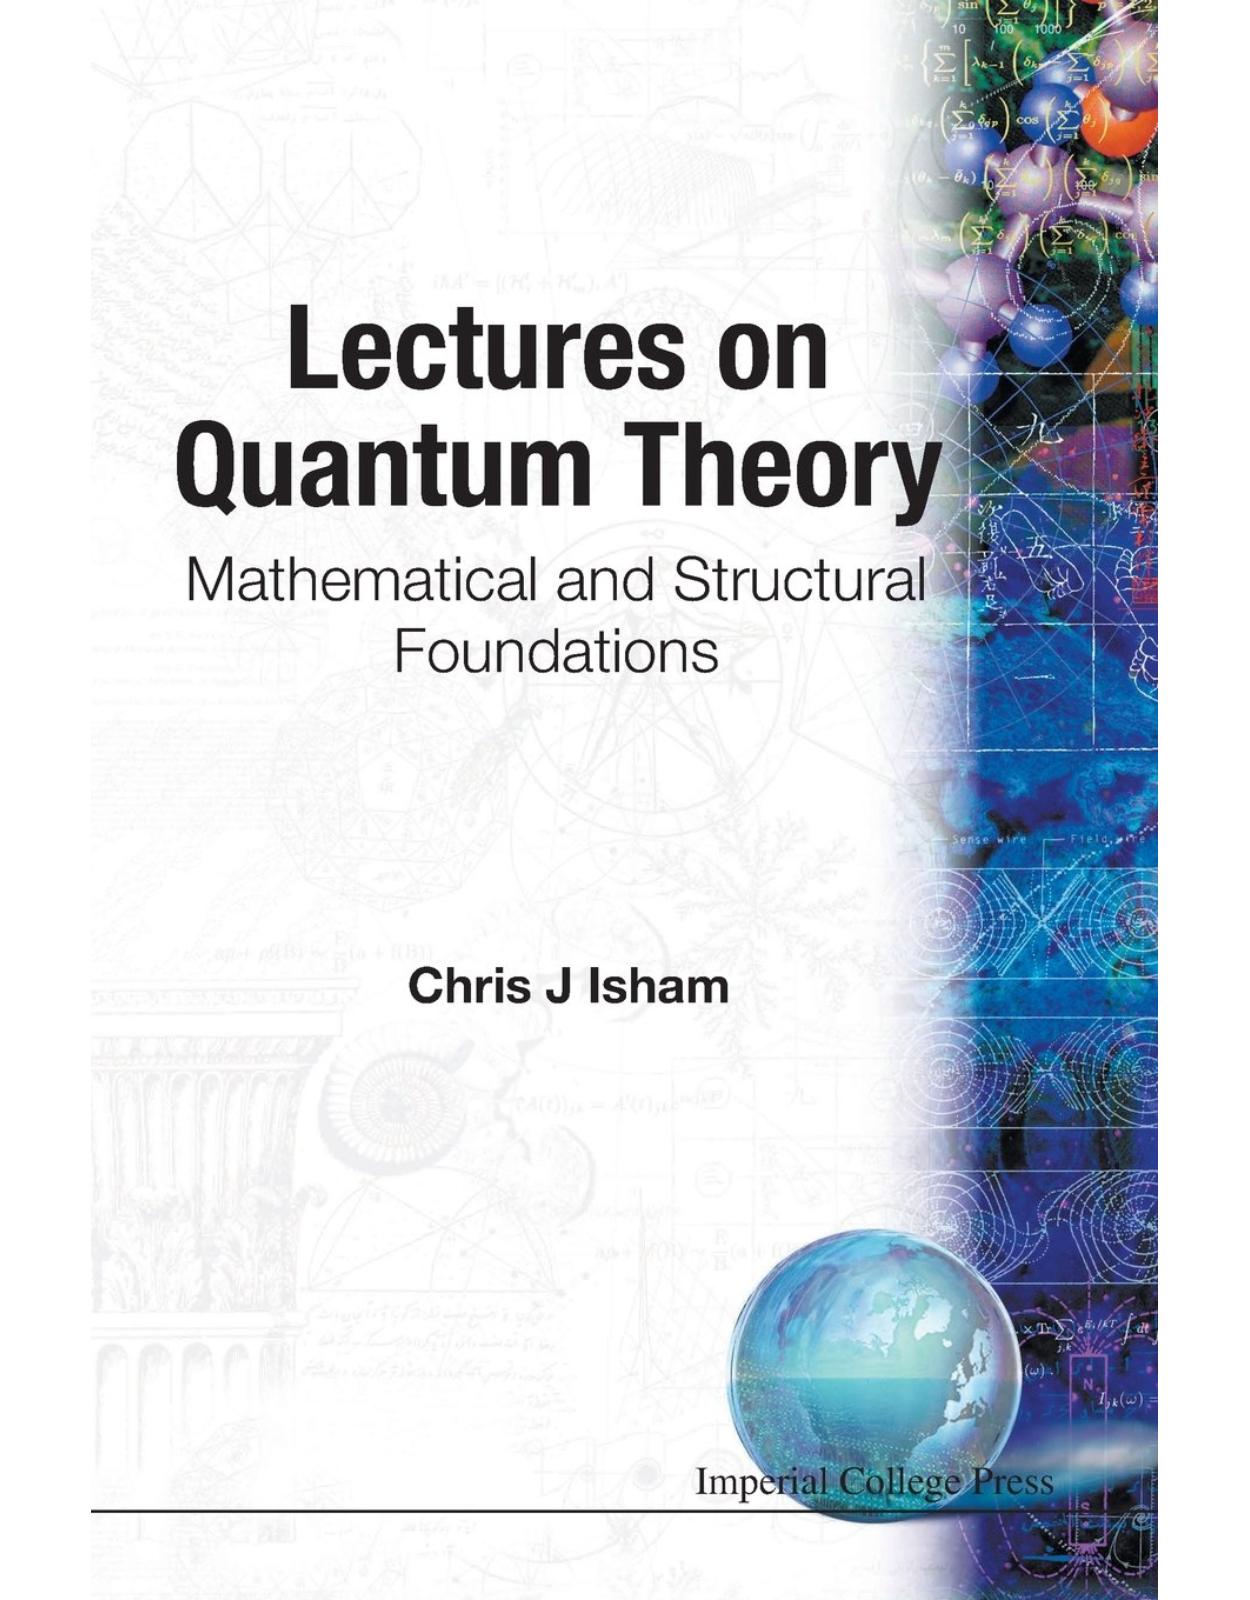 Lectures on Quantum Theory. Mathematical and Structural Foundations